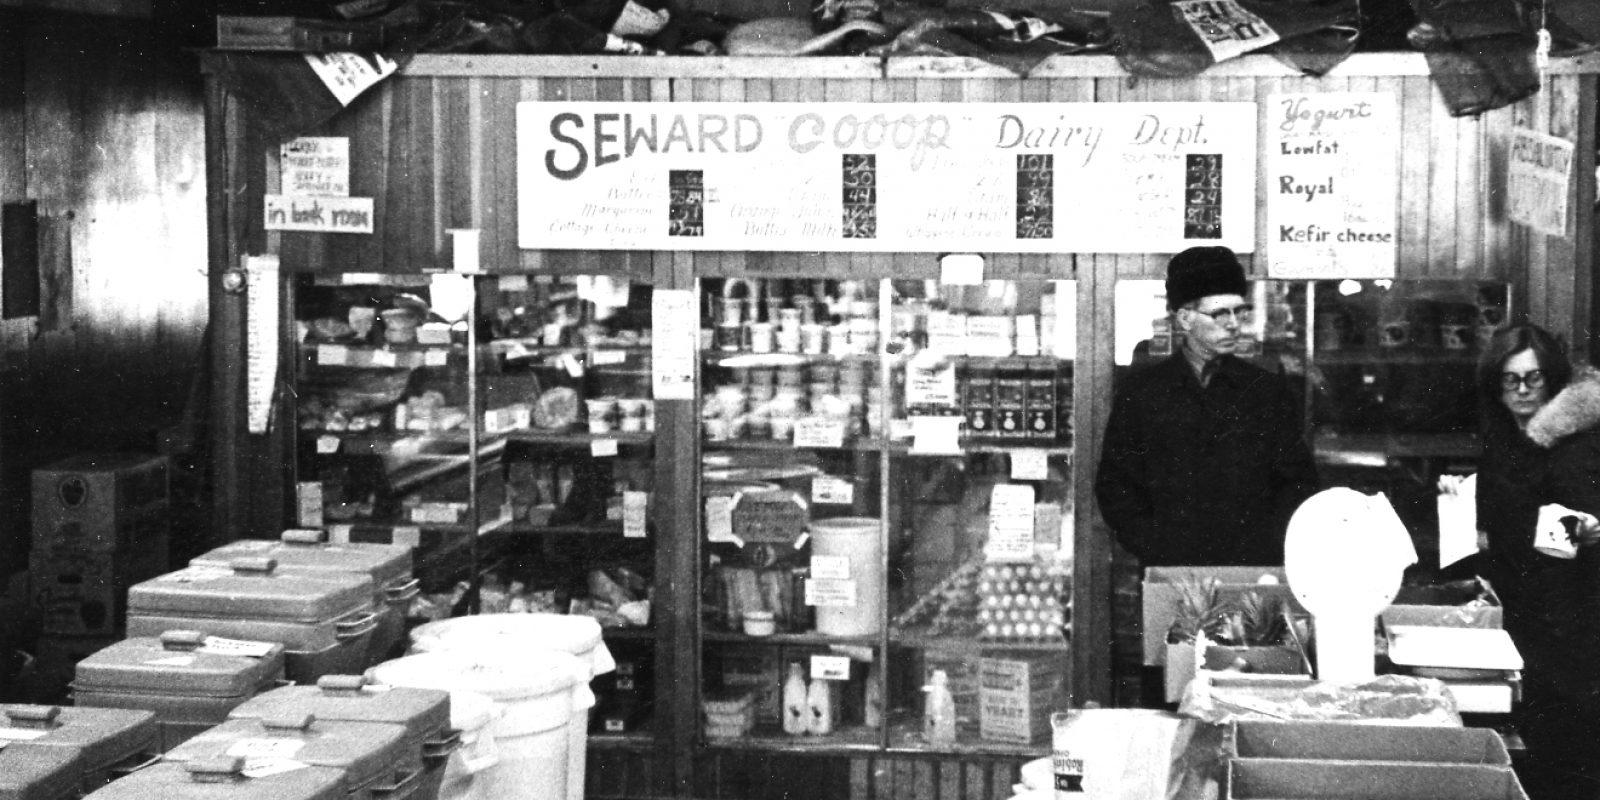 black and white image of 1970s Seward Co-op dairy department